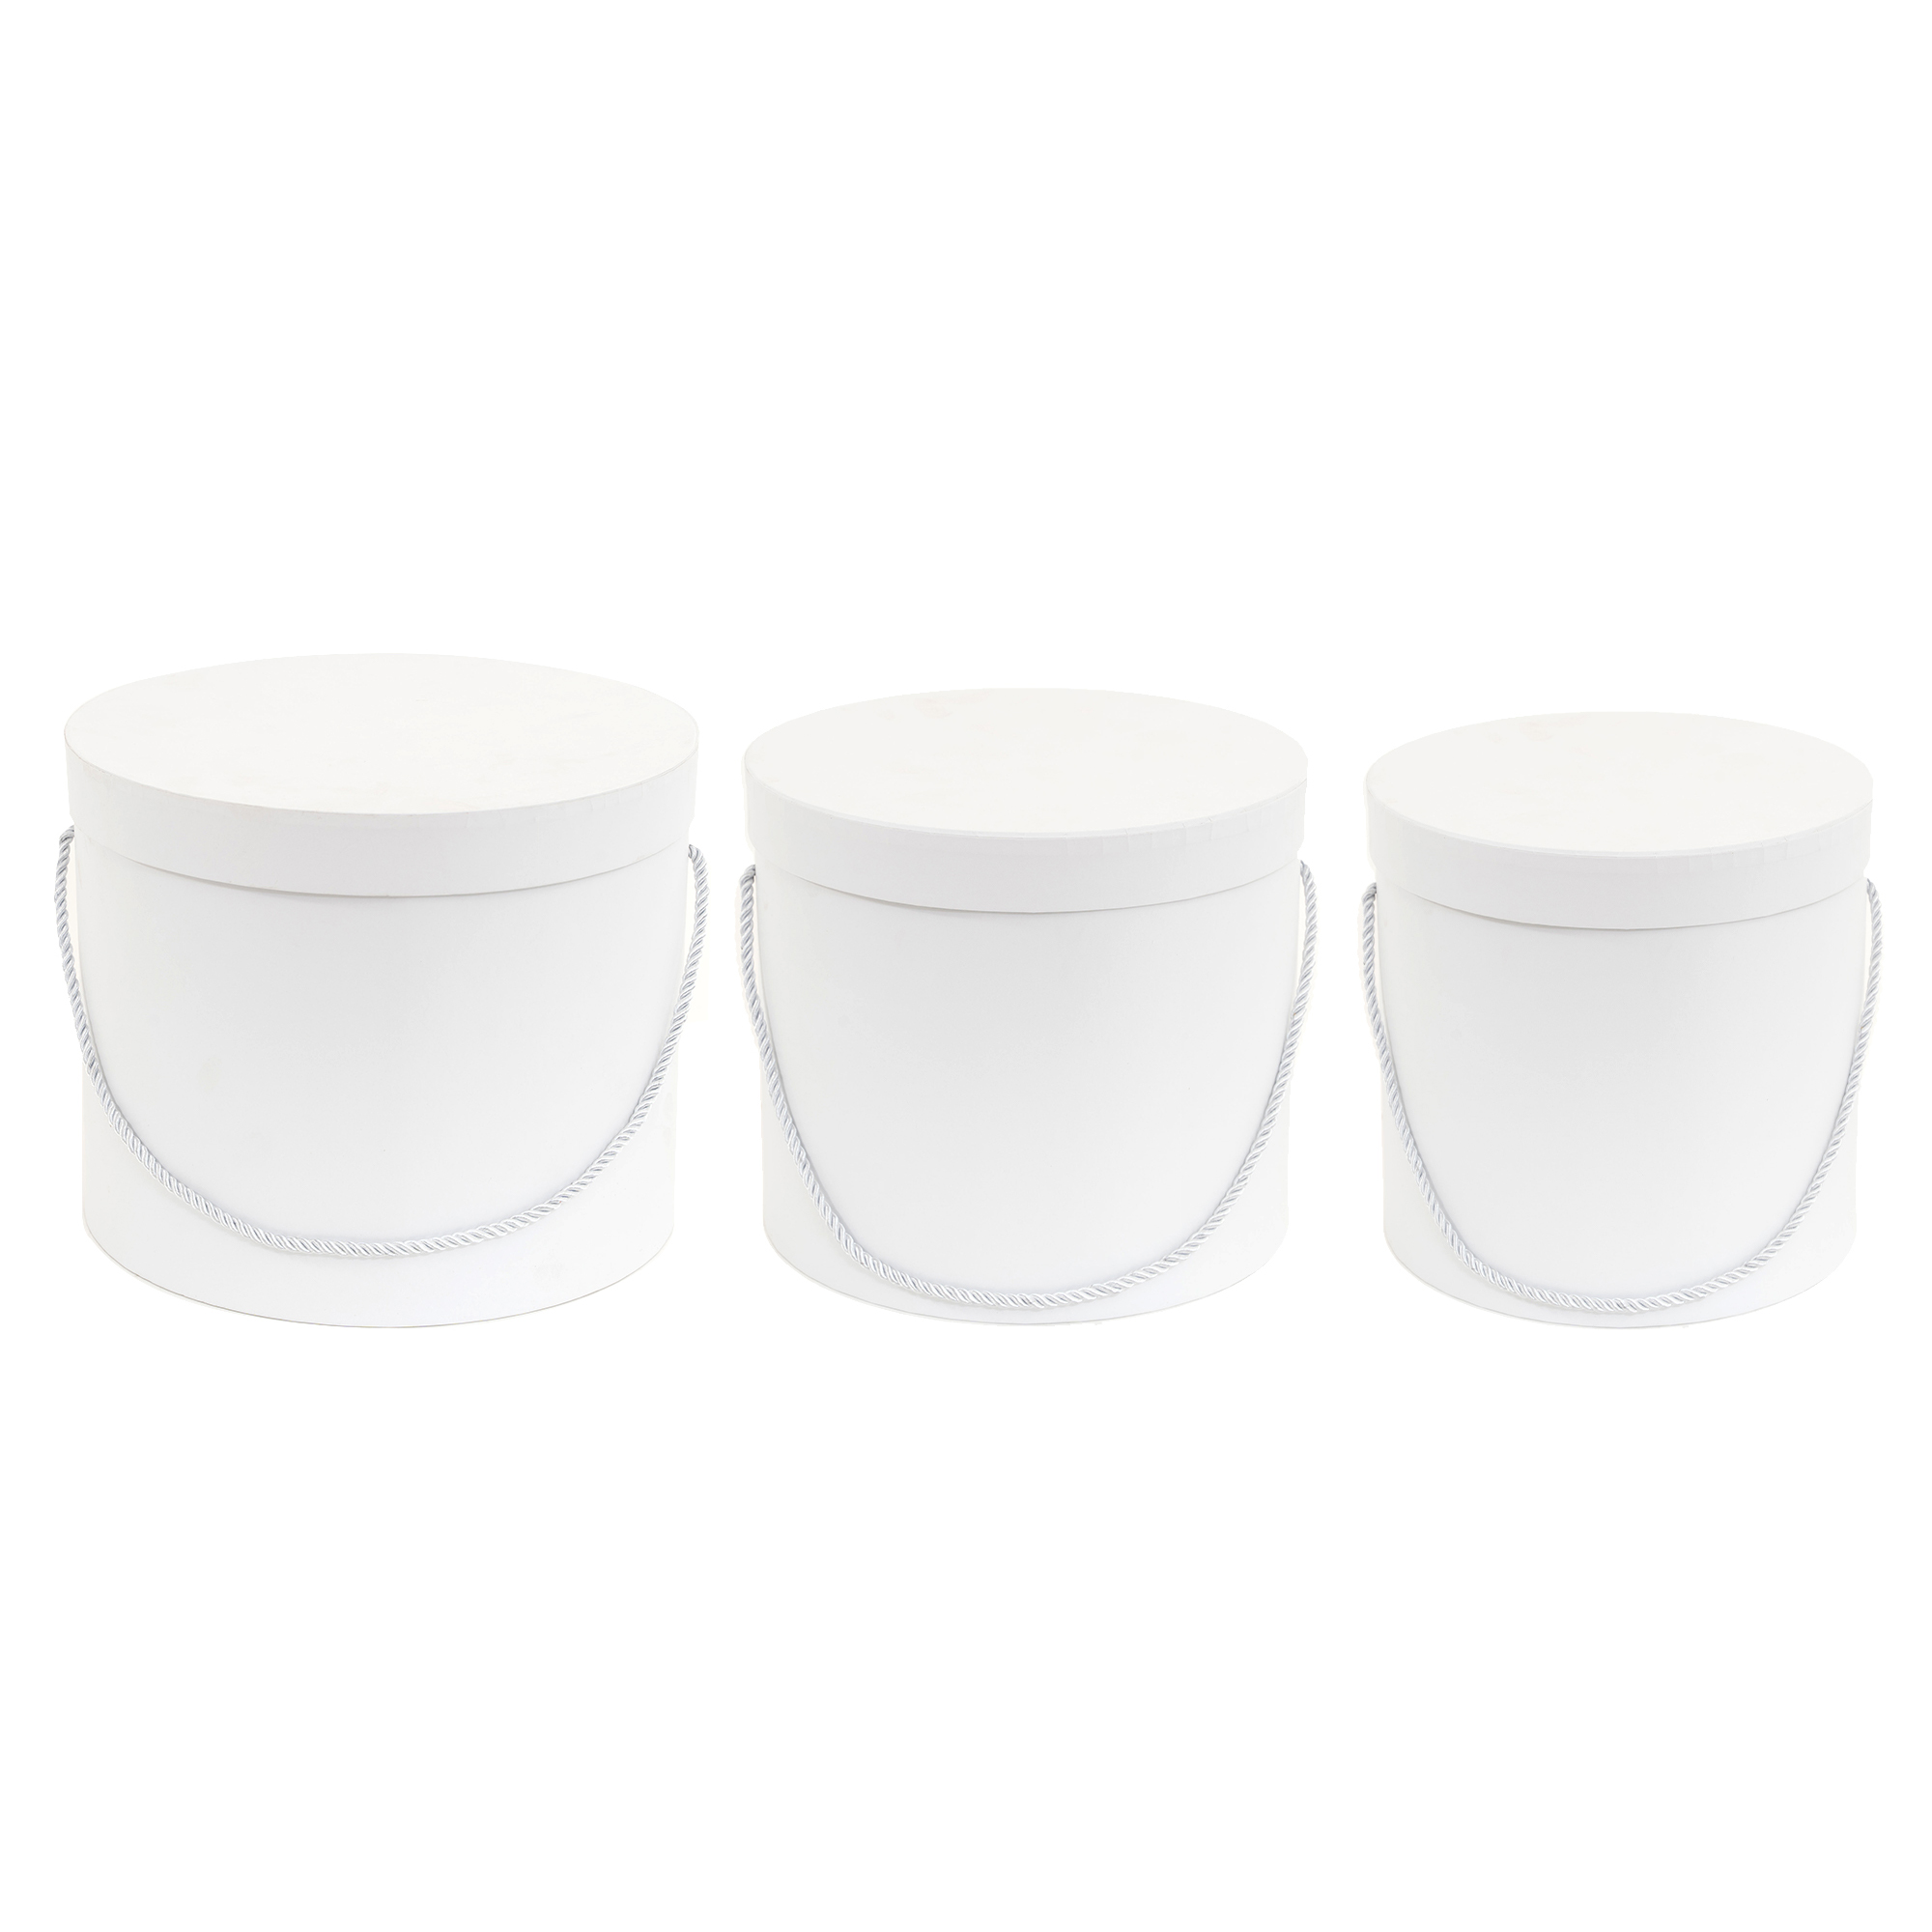 Nested Floral Boxes 3pc/set - All White